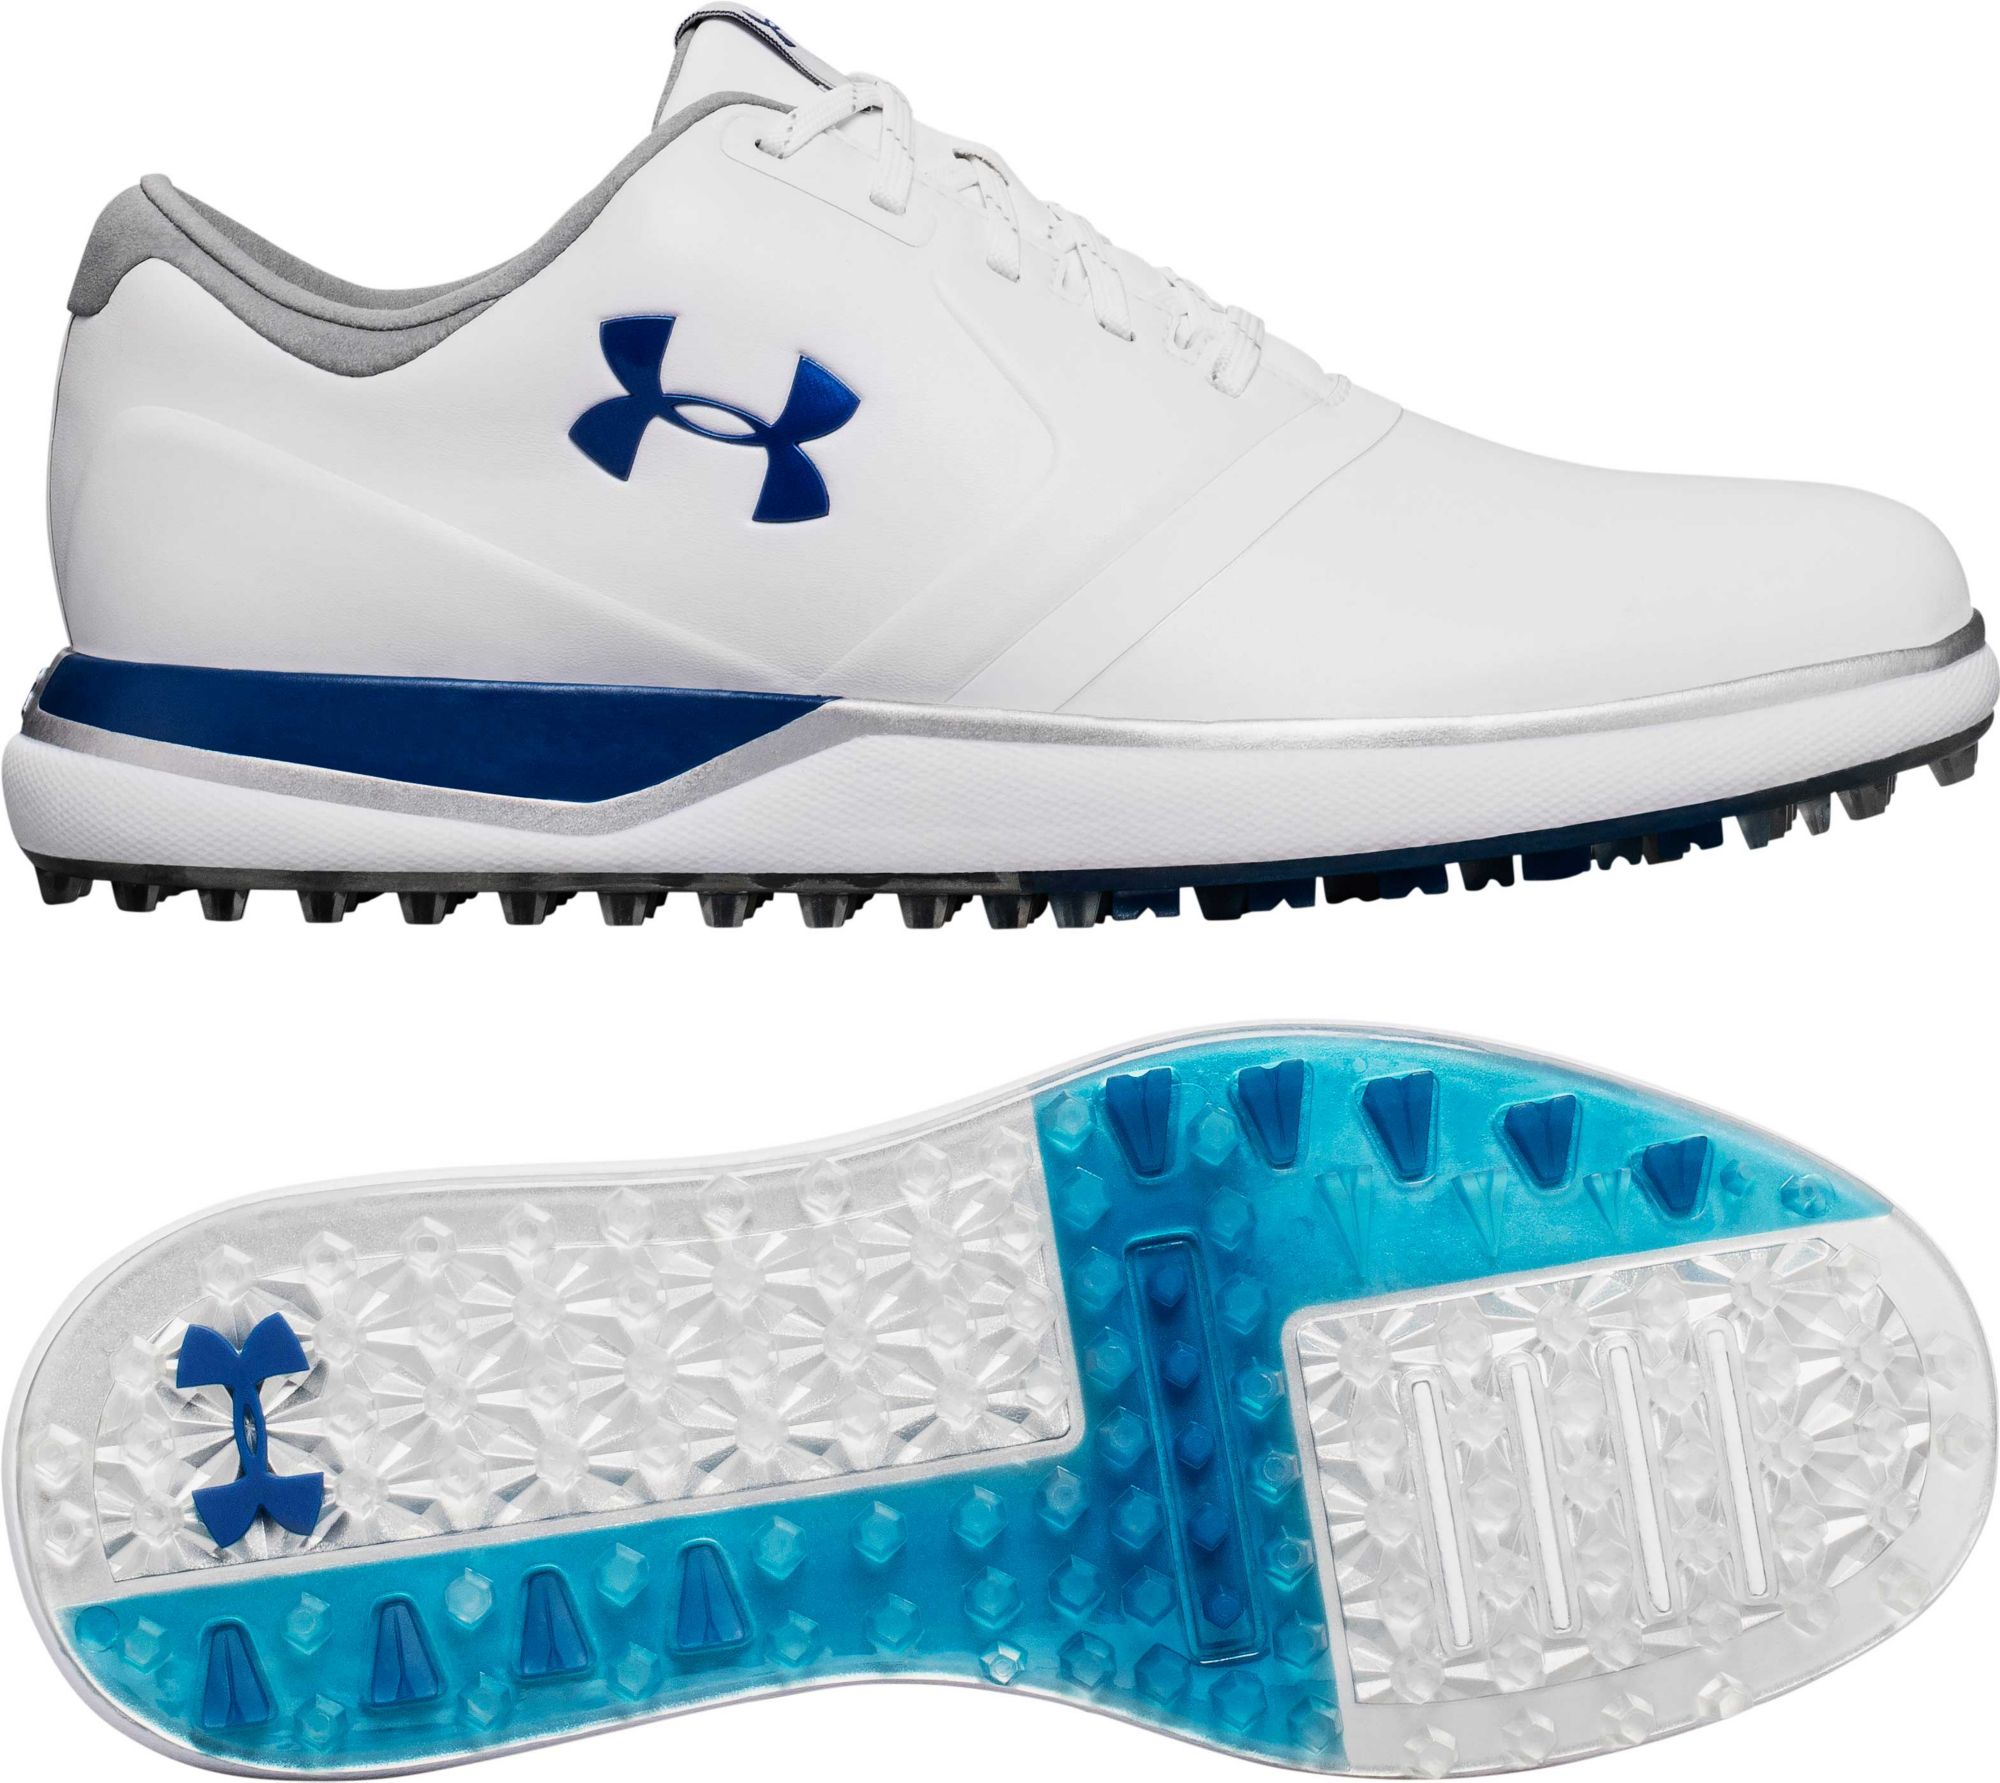 under armor womens golf shoes